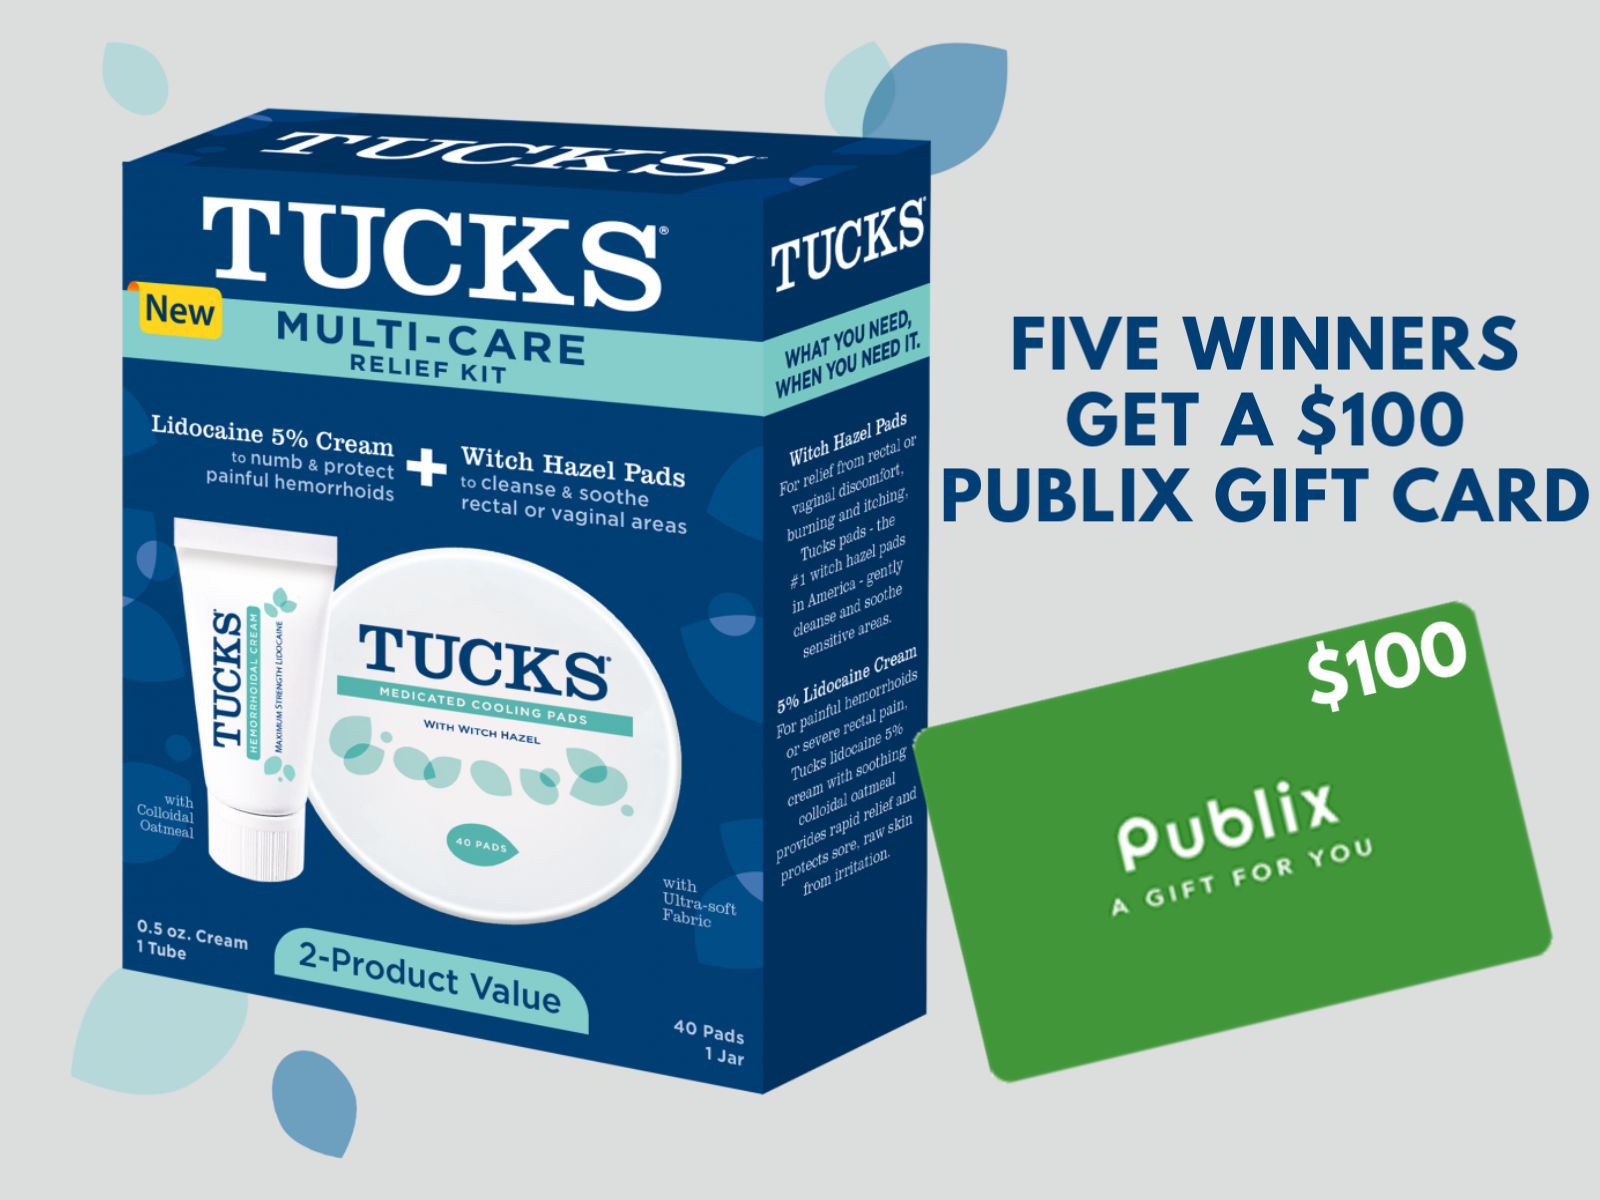 Look For Tucks Multi-Care Relief Kit At Publix + Enter To Win One Of Five $100 Publix Gift Cards! on I Heart Publix